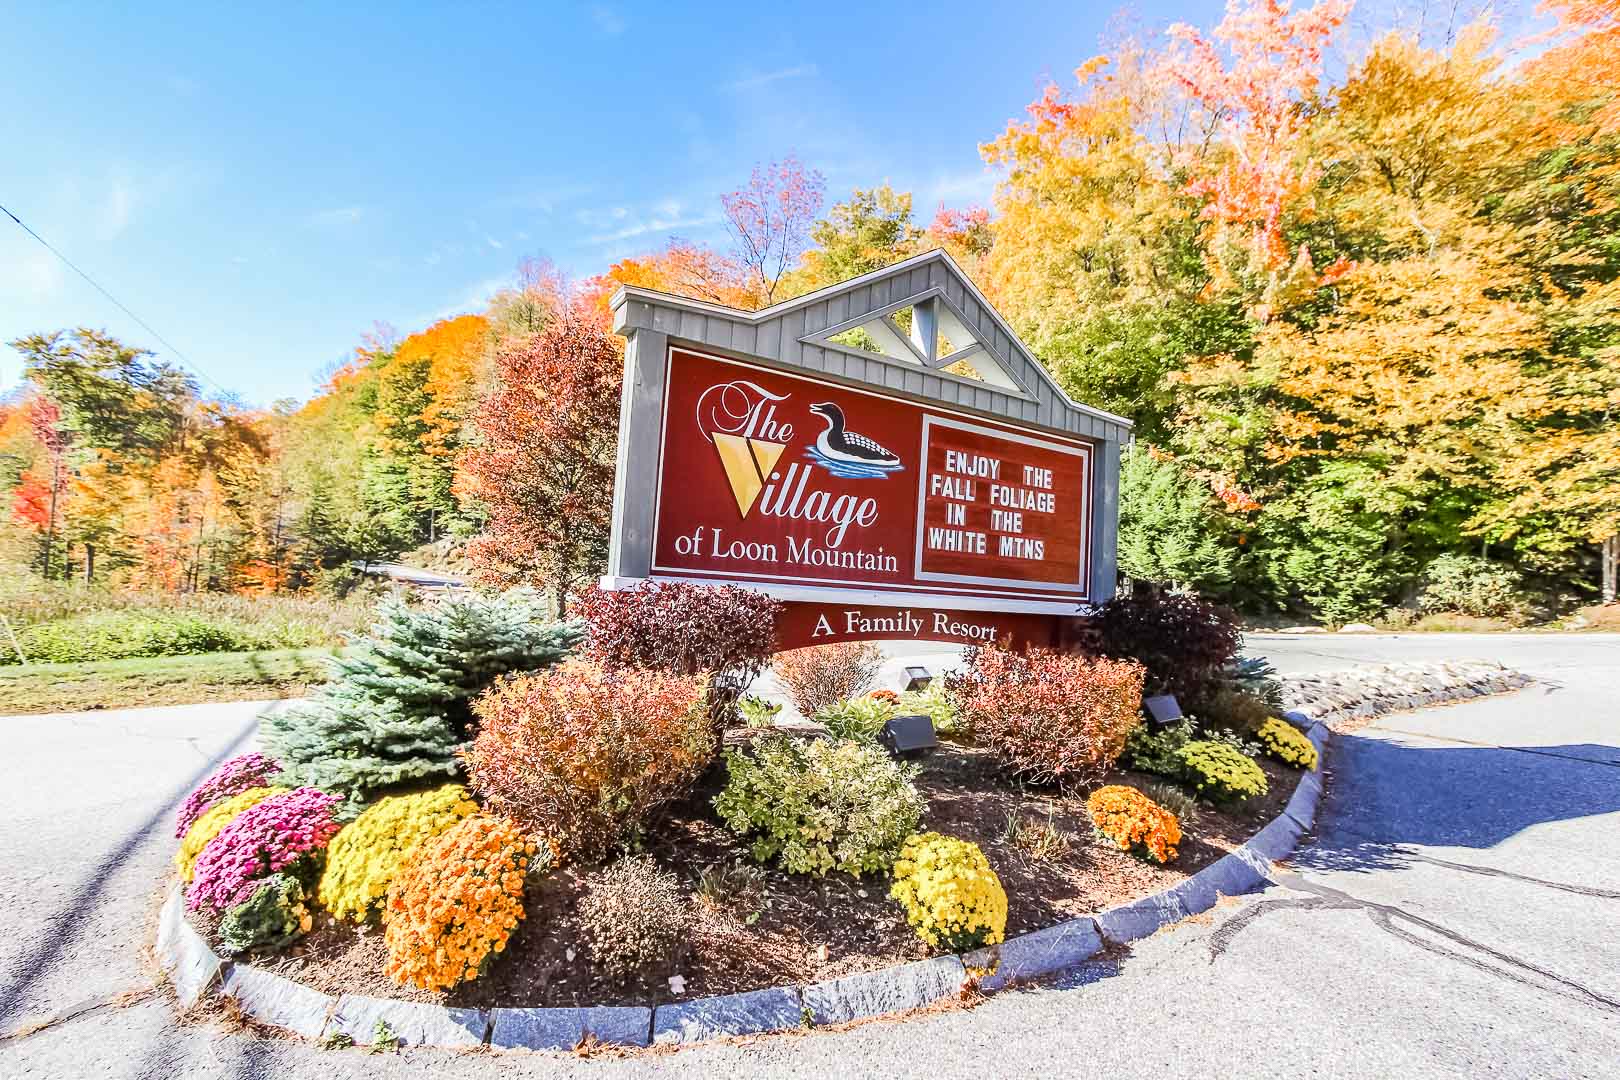 A welcoming resort entrance at Village of Loon Mountain in Lincoln, New Hampshire.